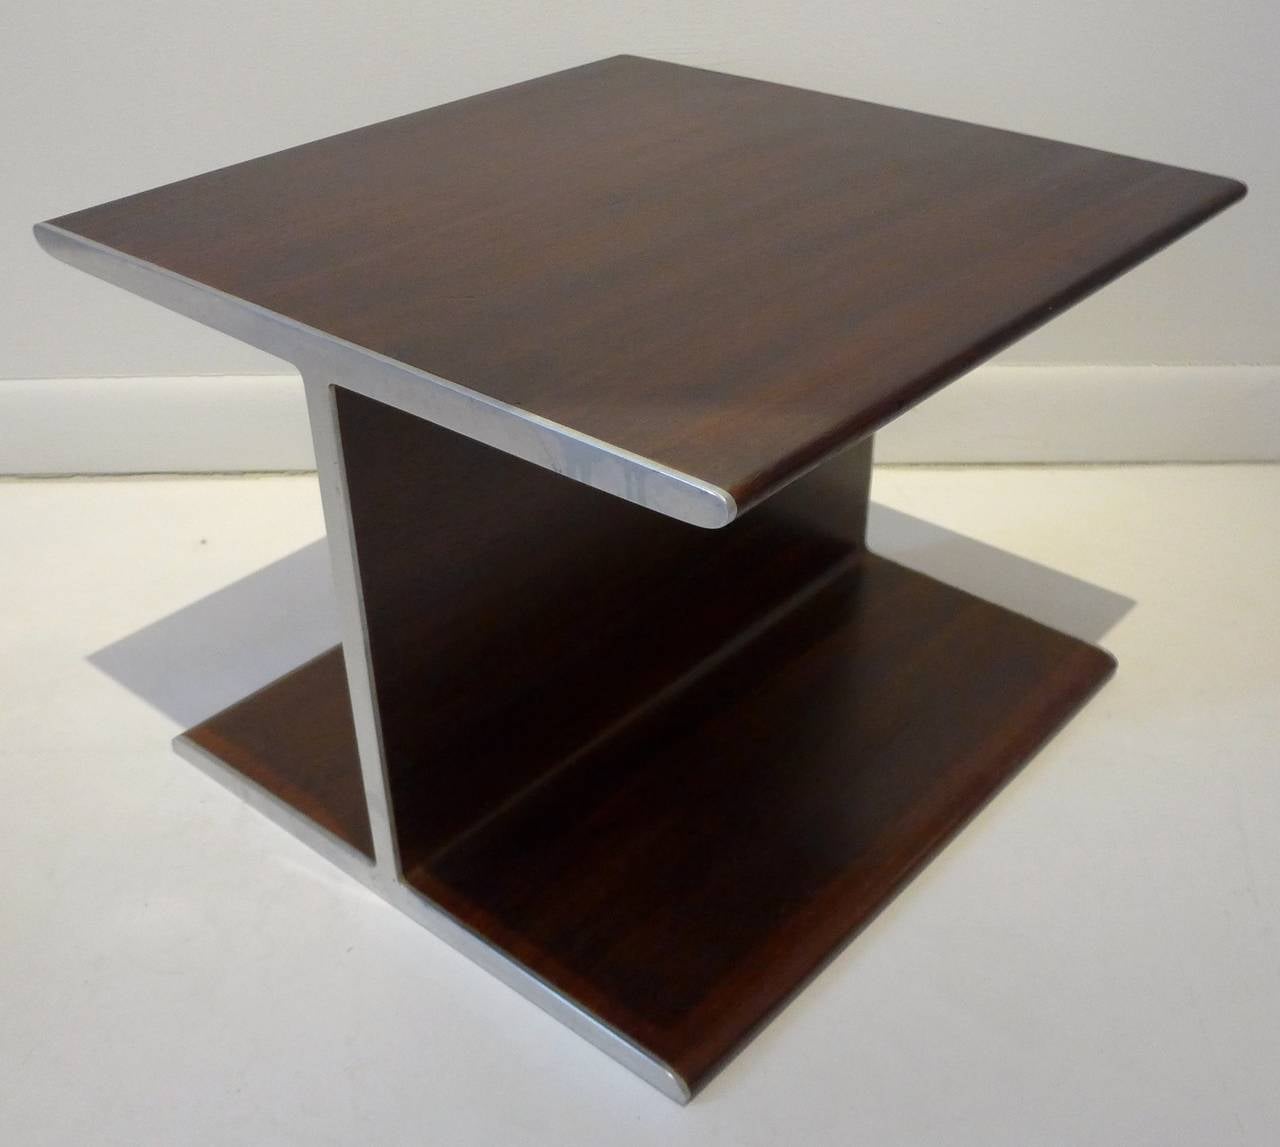 I-shaped table in walnut with steel edging on opposing sides.  An unusual mid century design that can serve as a side table or pedestal. Reminiscent of the steel i-beam tables Ward Bennett designed for Brickel, with the obvious substitution of wood